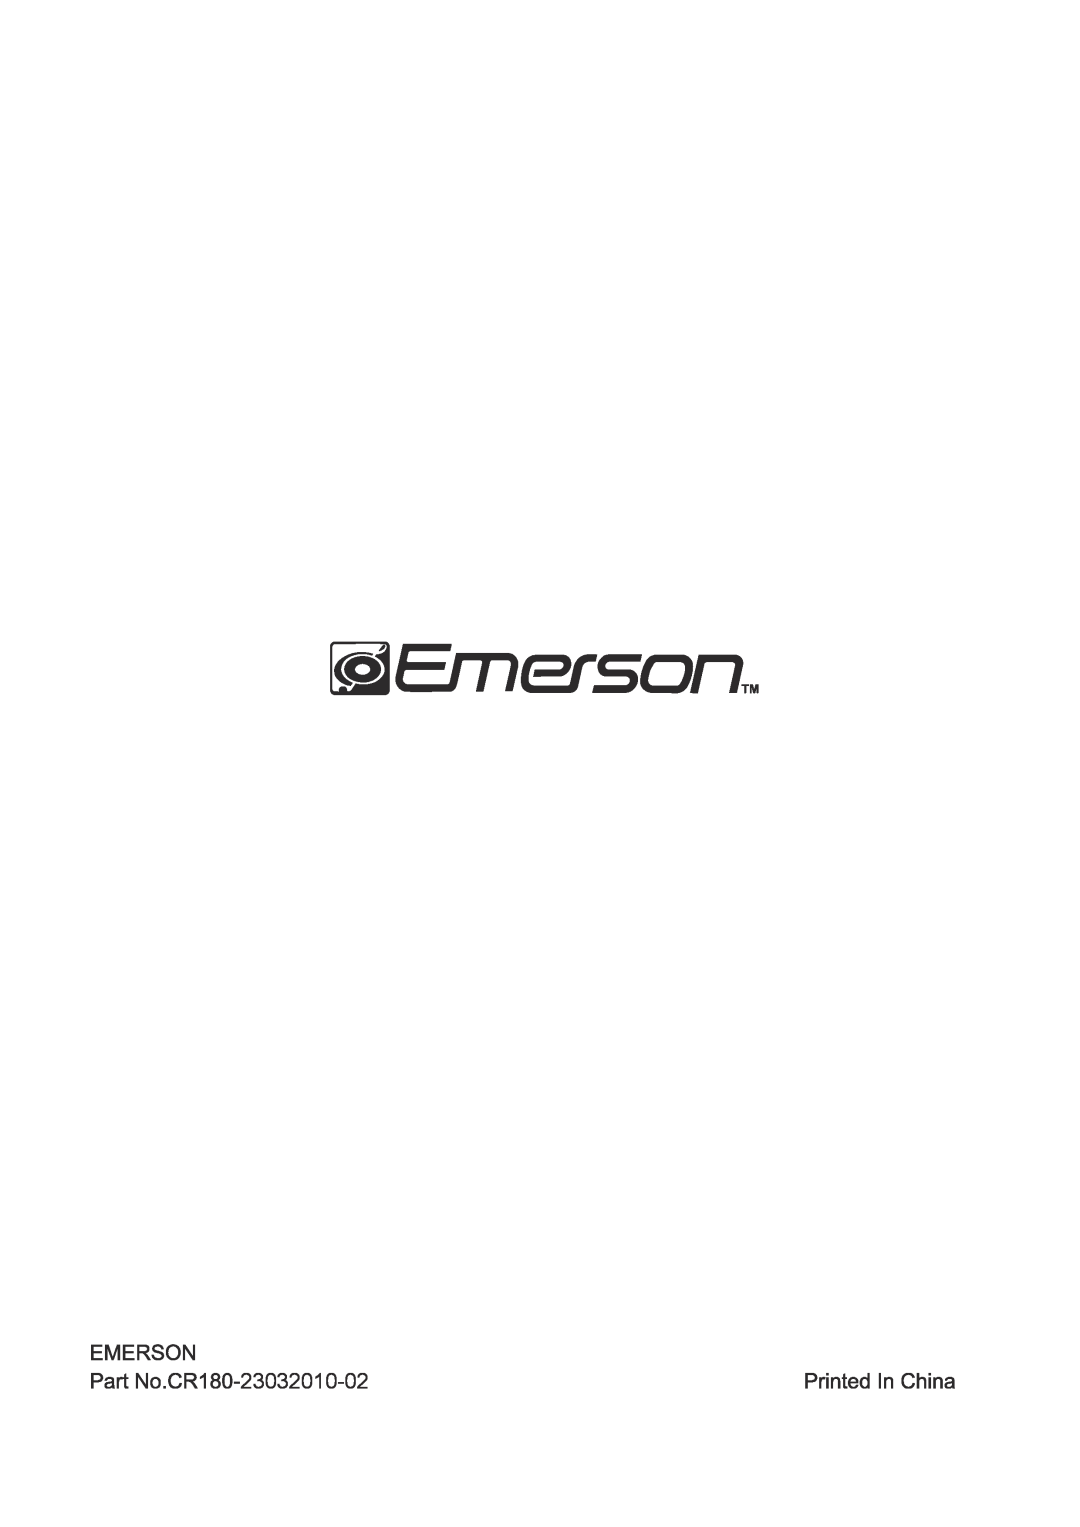 Emerson Refrigerator important safety instructions 23032010-02 